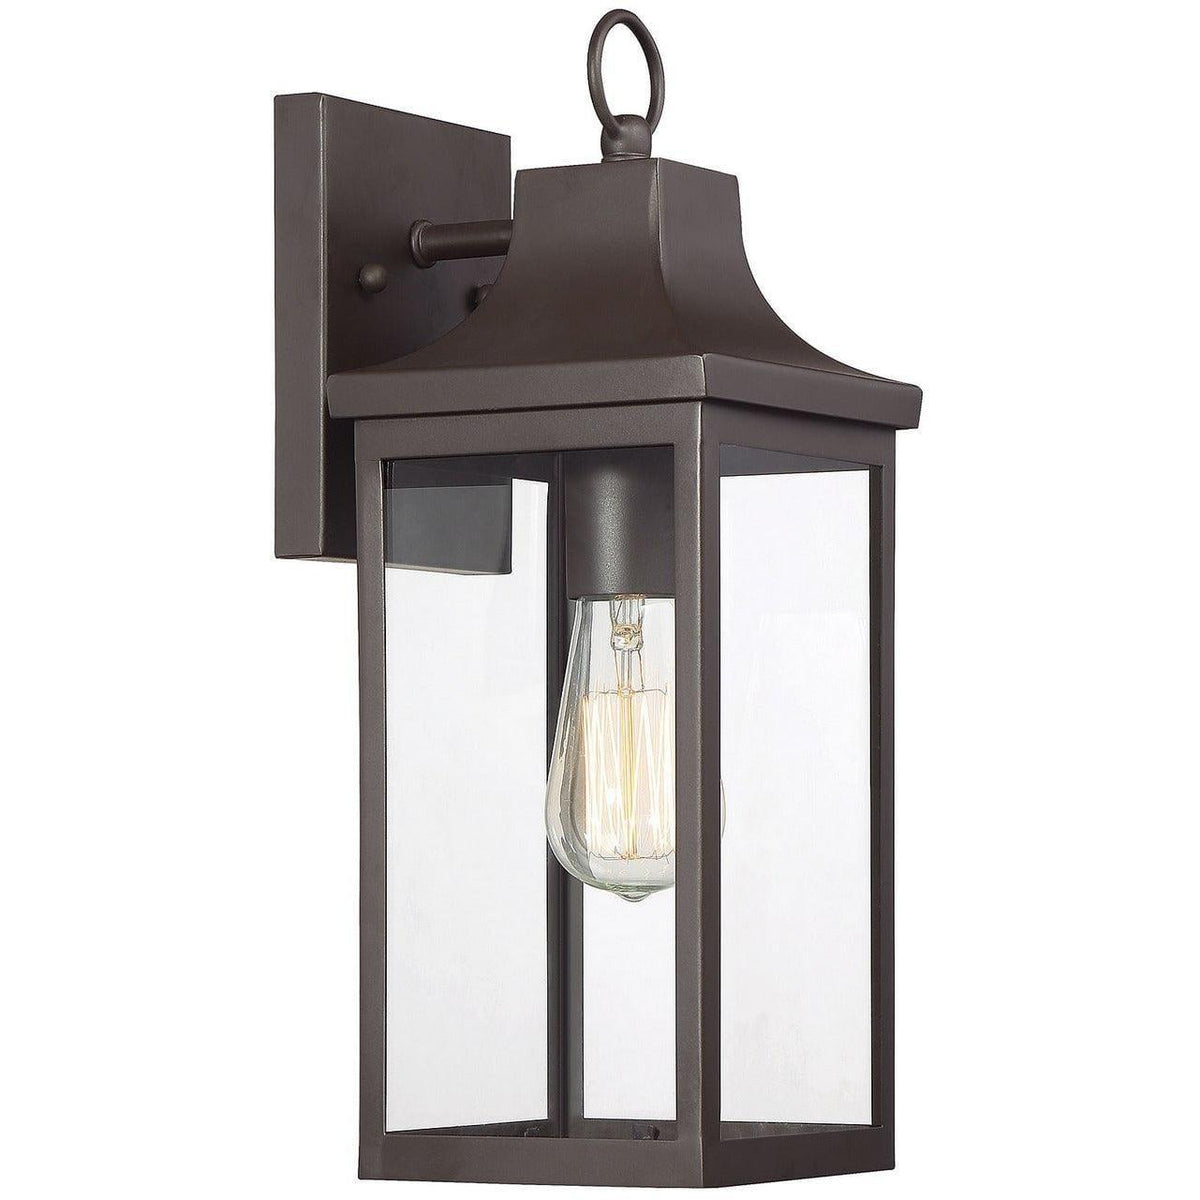 Meridian Lite Trends - Meridian One Light Outdoor Wall Sconce - M50024ORB | Montreal Lighting & Hardware